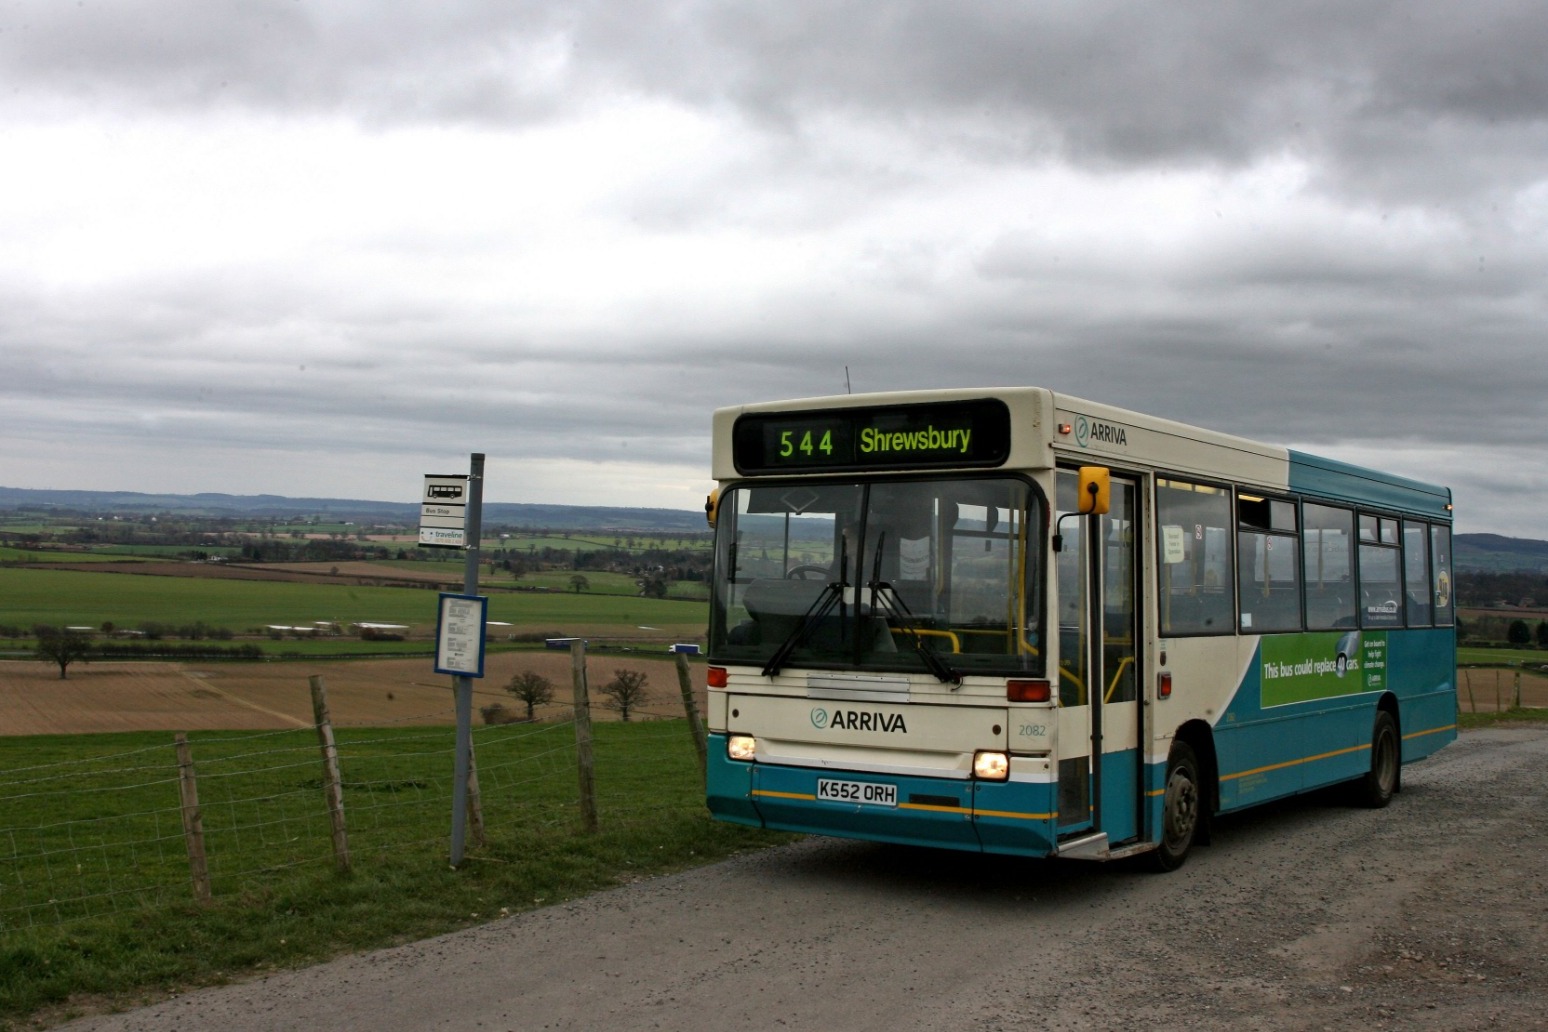 BUS SERVICES FUNDING HALVED IN SOME ENGLISH REGIONS - TUC 